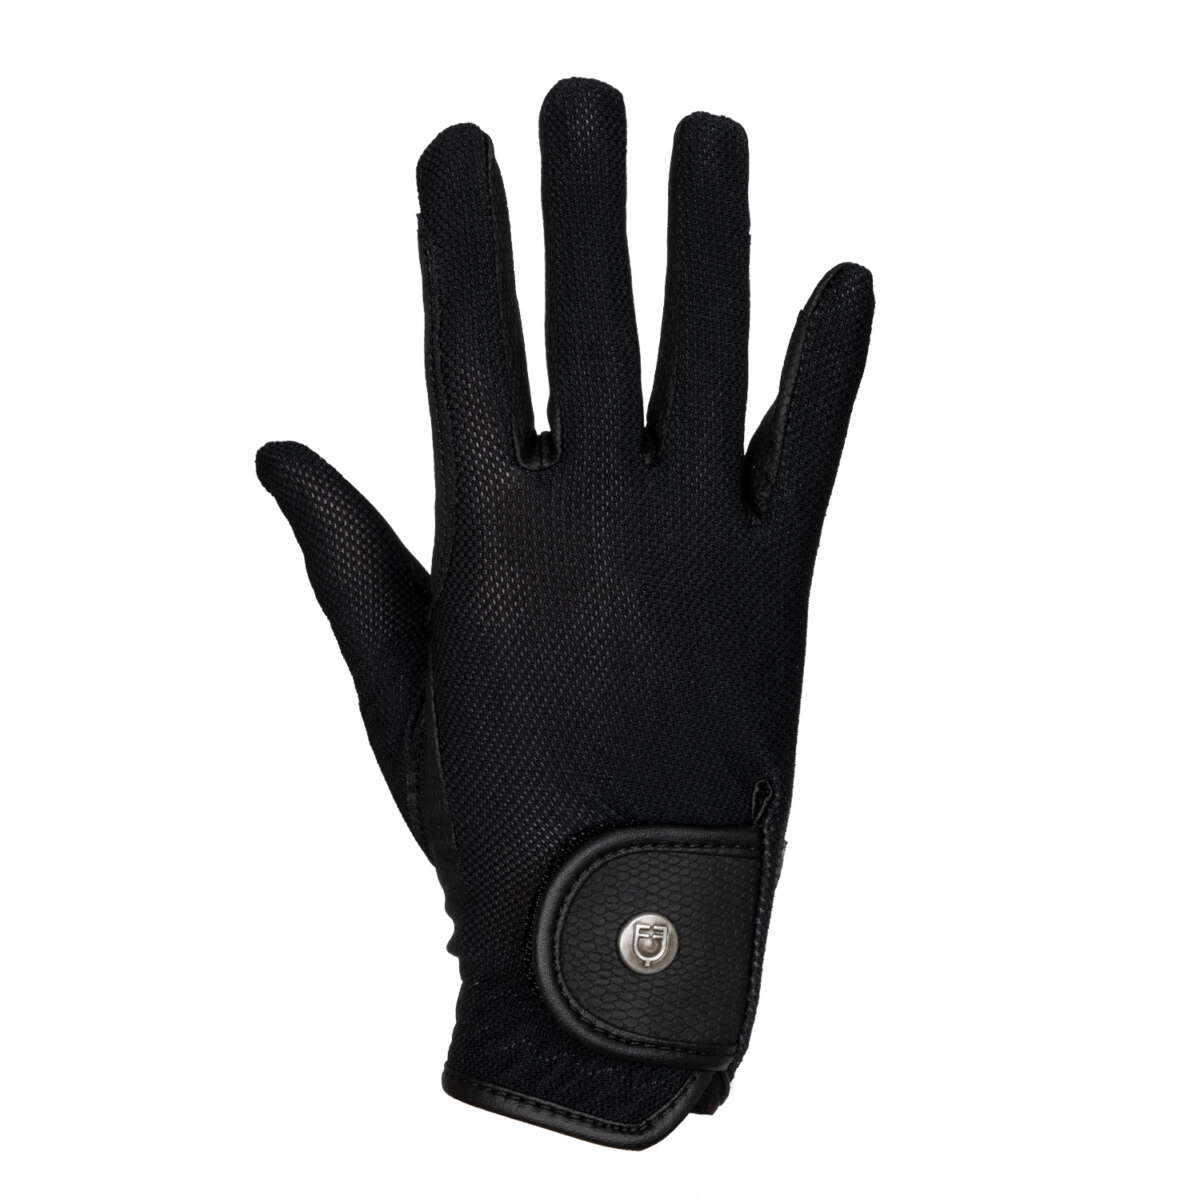 0042763_unisex-gloves-in-technical-fabric-and-mesh_etu03020